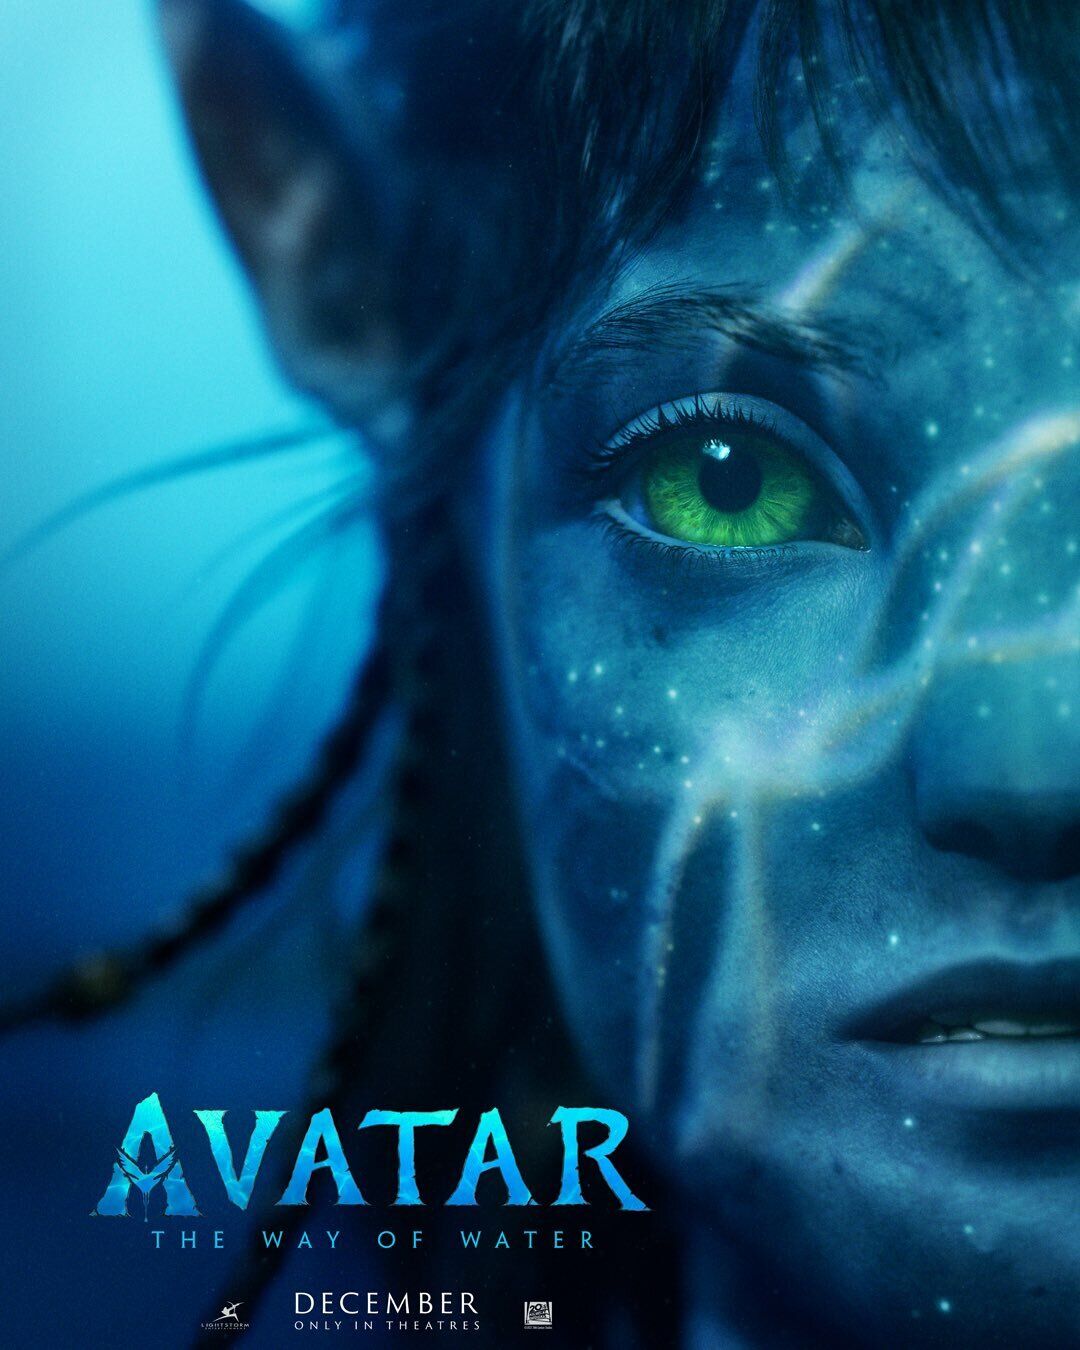 Avatar The Way of Water New (2022) Movie, Reproduction Decal Poster, wall art